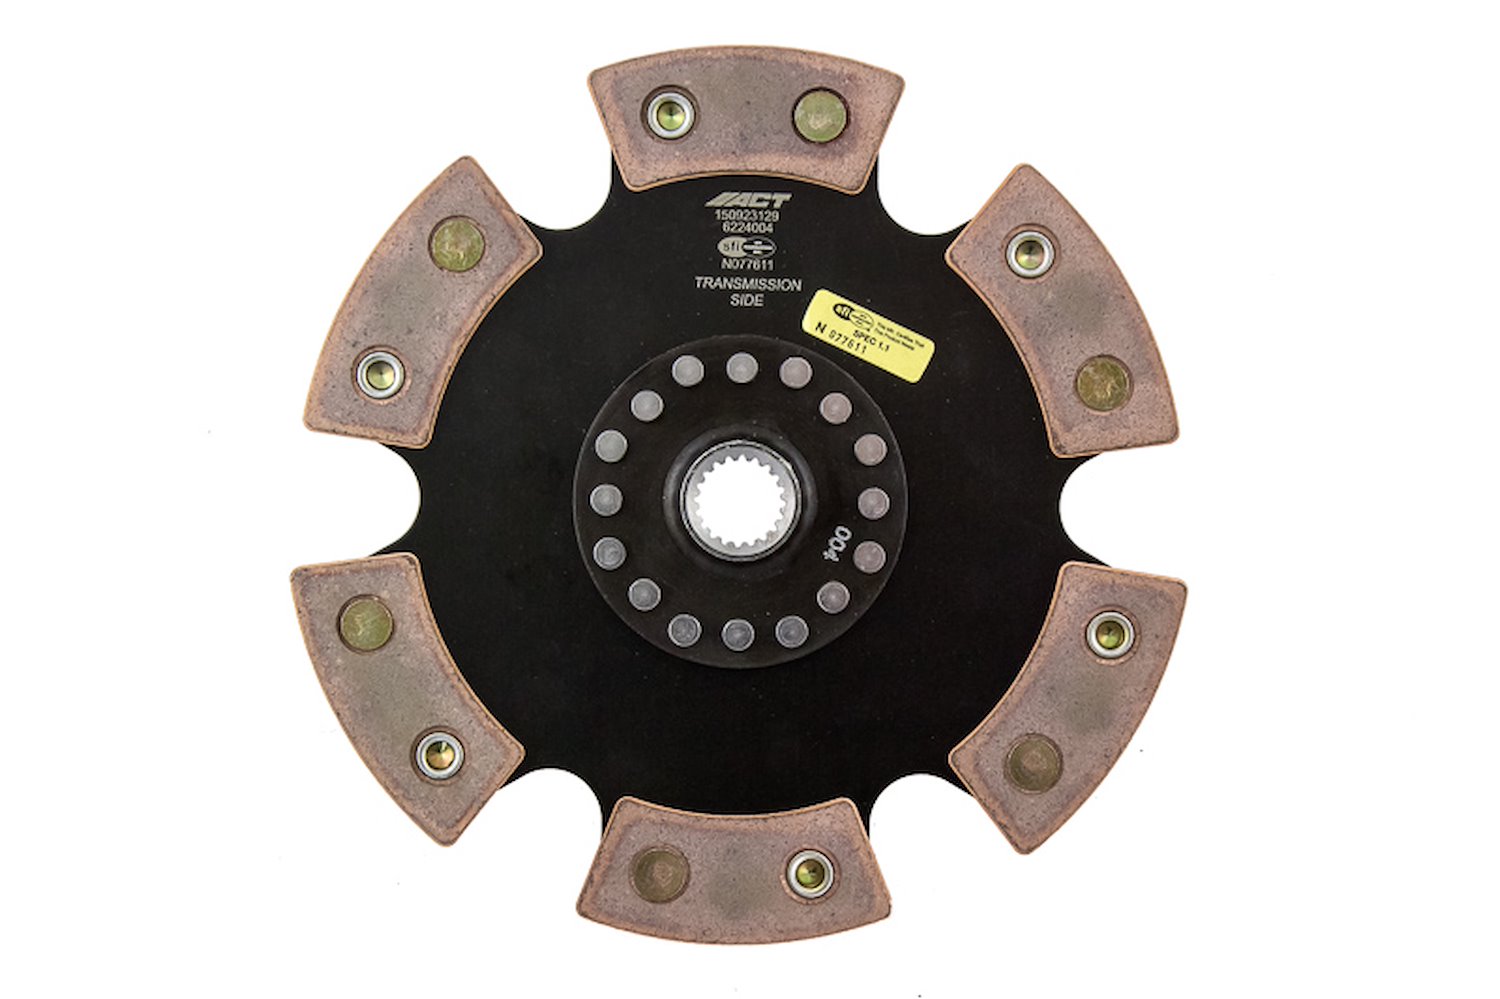 6-Pad Rigid Race Disc Transmission Clutch Friction Plate Fits Select Chrysler/Dodge/Eagle/Mitsubishi/Plymouth